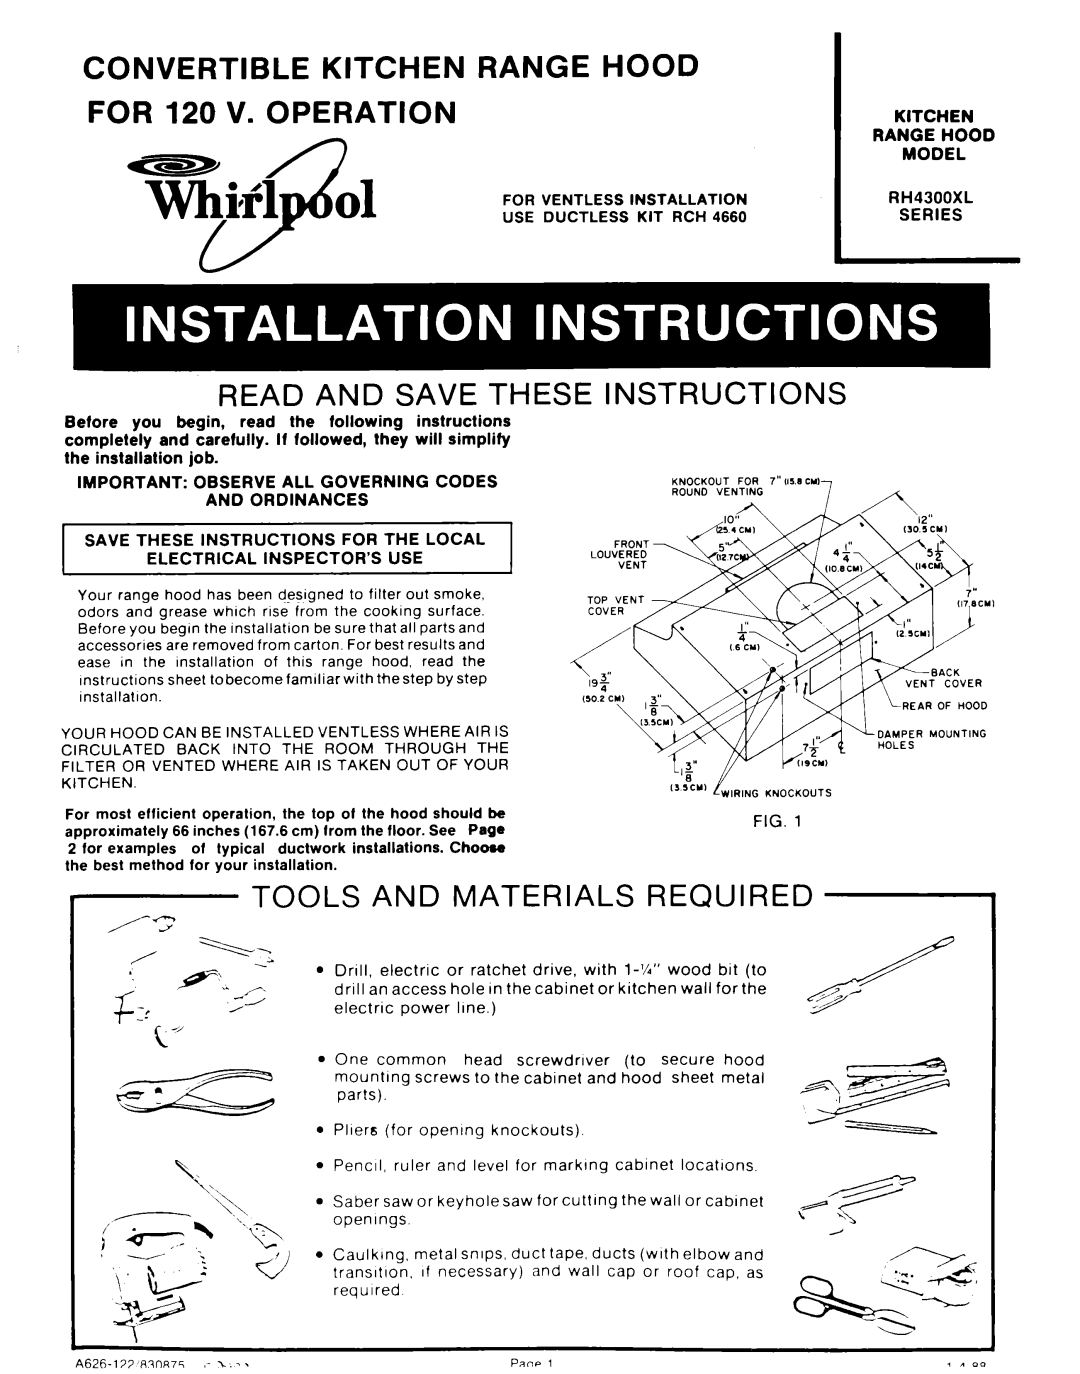 Whirlpool RH4300XL manual CONVERTIBLE KITCHEN RANGE HOOD FOR 120 V. OPERATION, Read And Save These Instructions, Series 